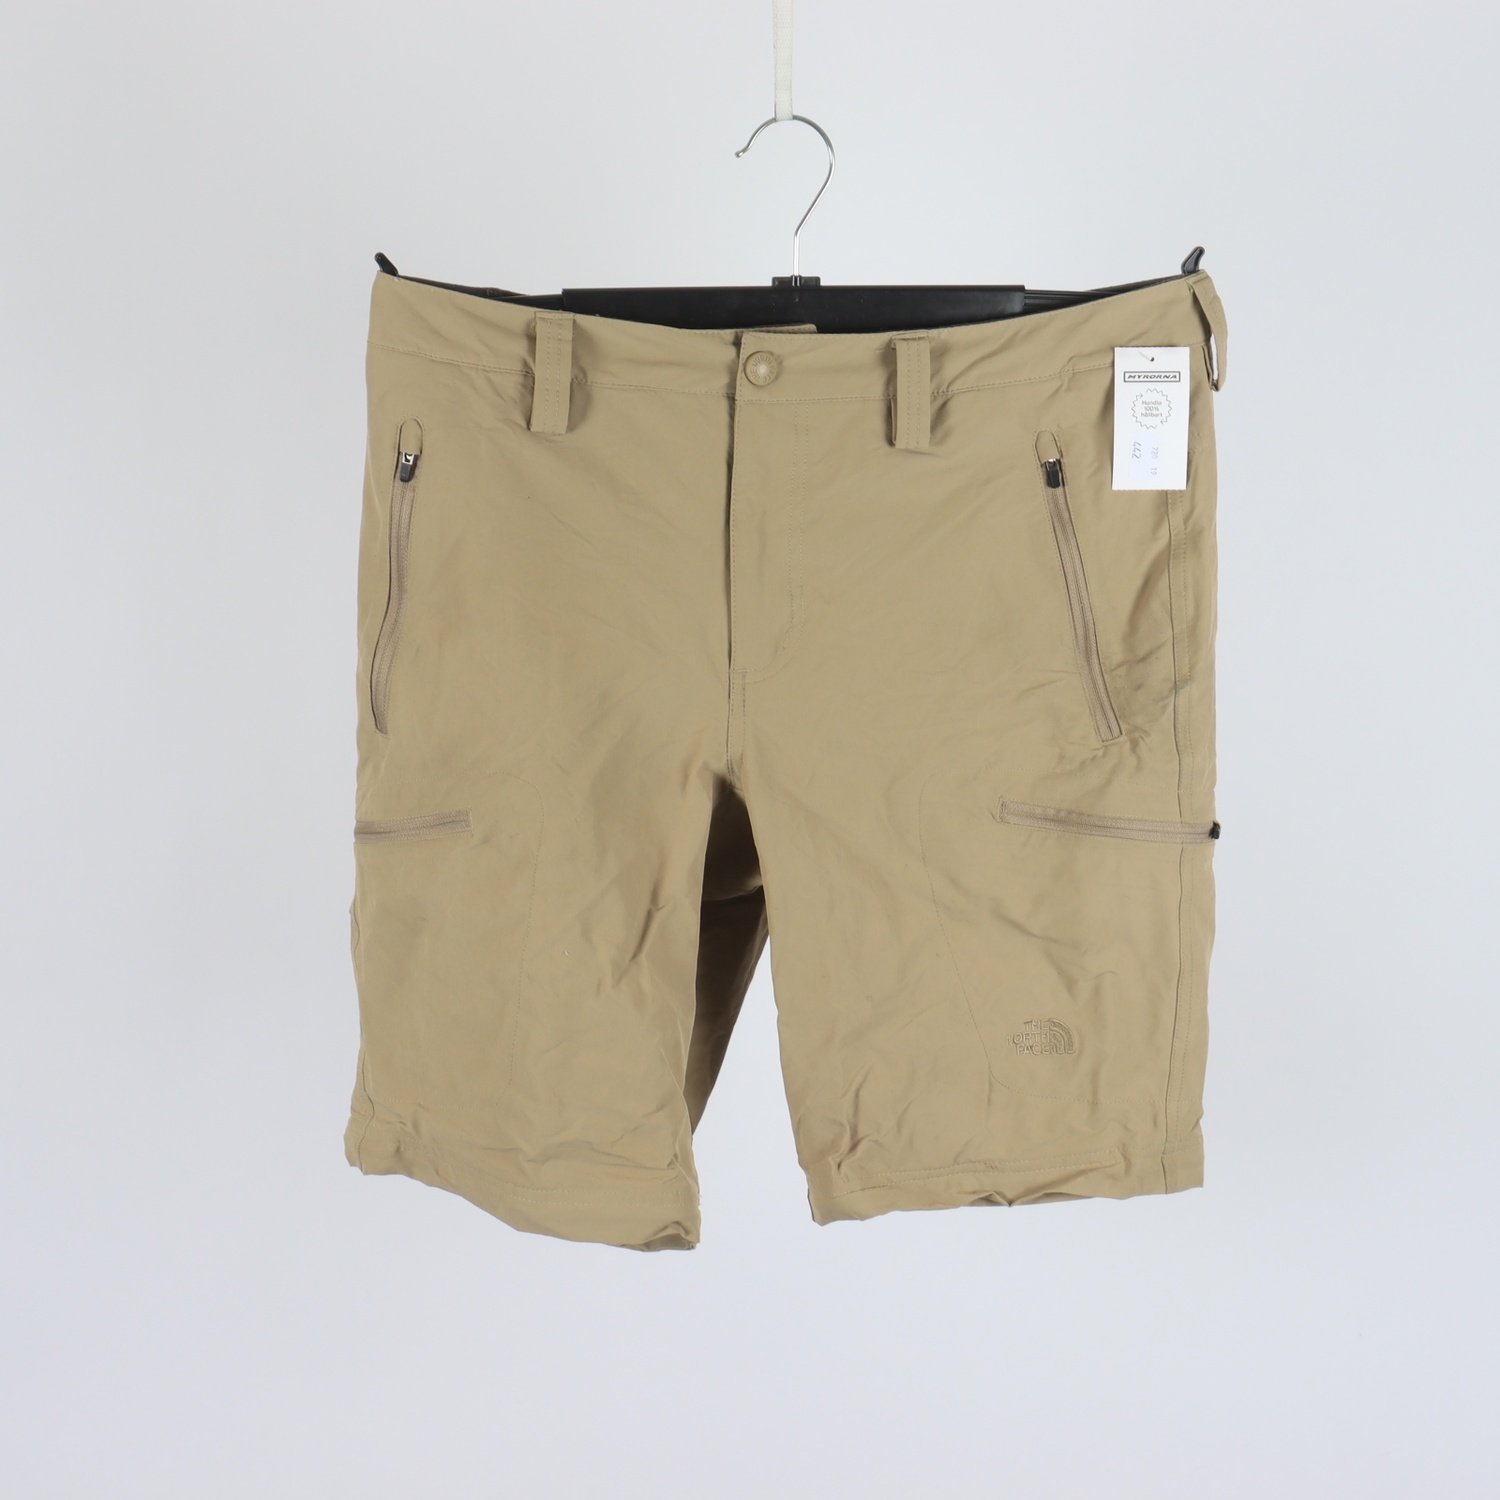 Shorts, The North Face, beige, stl. 34